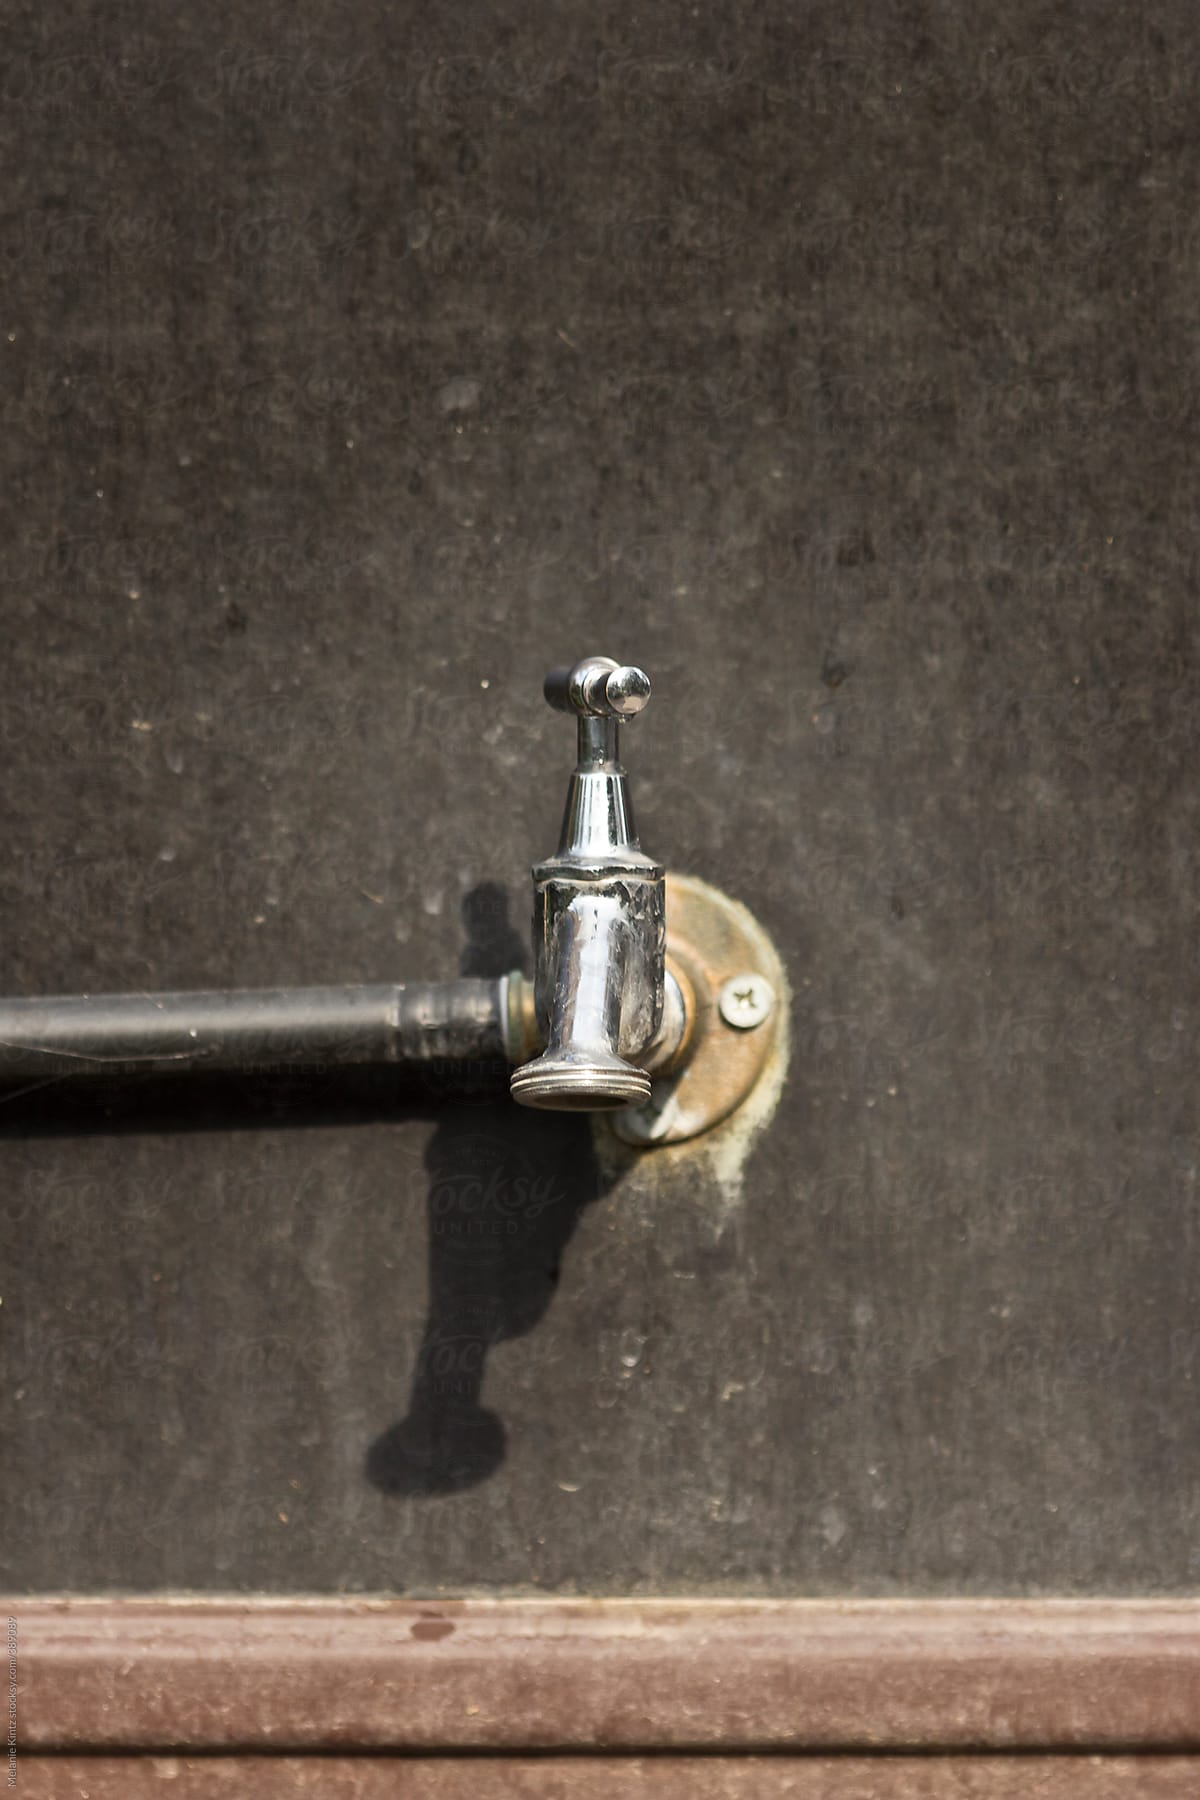 Outdoor water faucet on a dirty wall